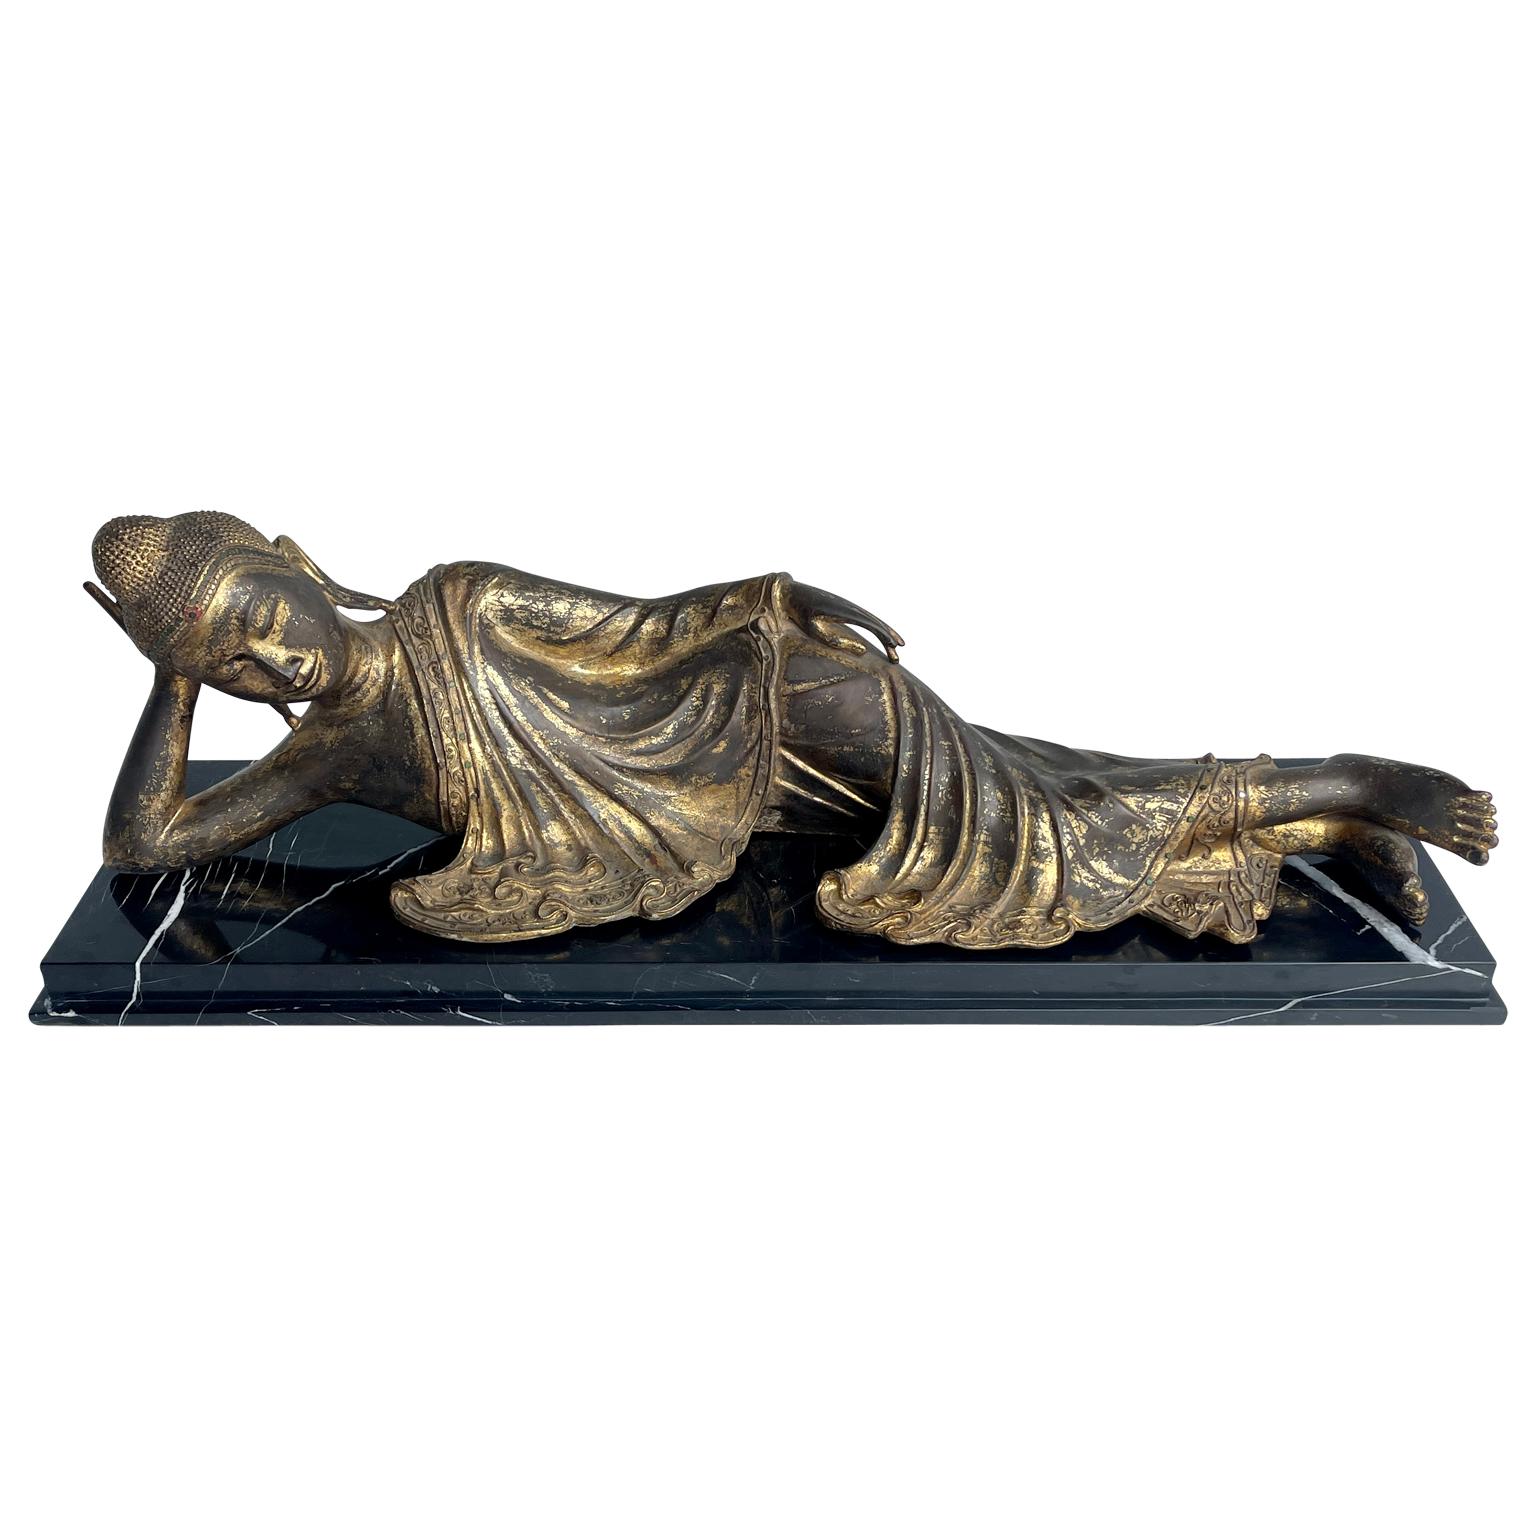 Large Mandalay Style Gilt Bronze Reclining Buddha Sculpture on Black Marble Base In Good Condition For Sale In Haddonfield, NJ